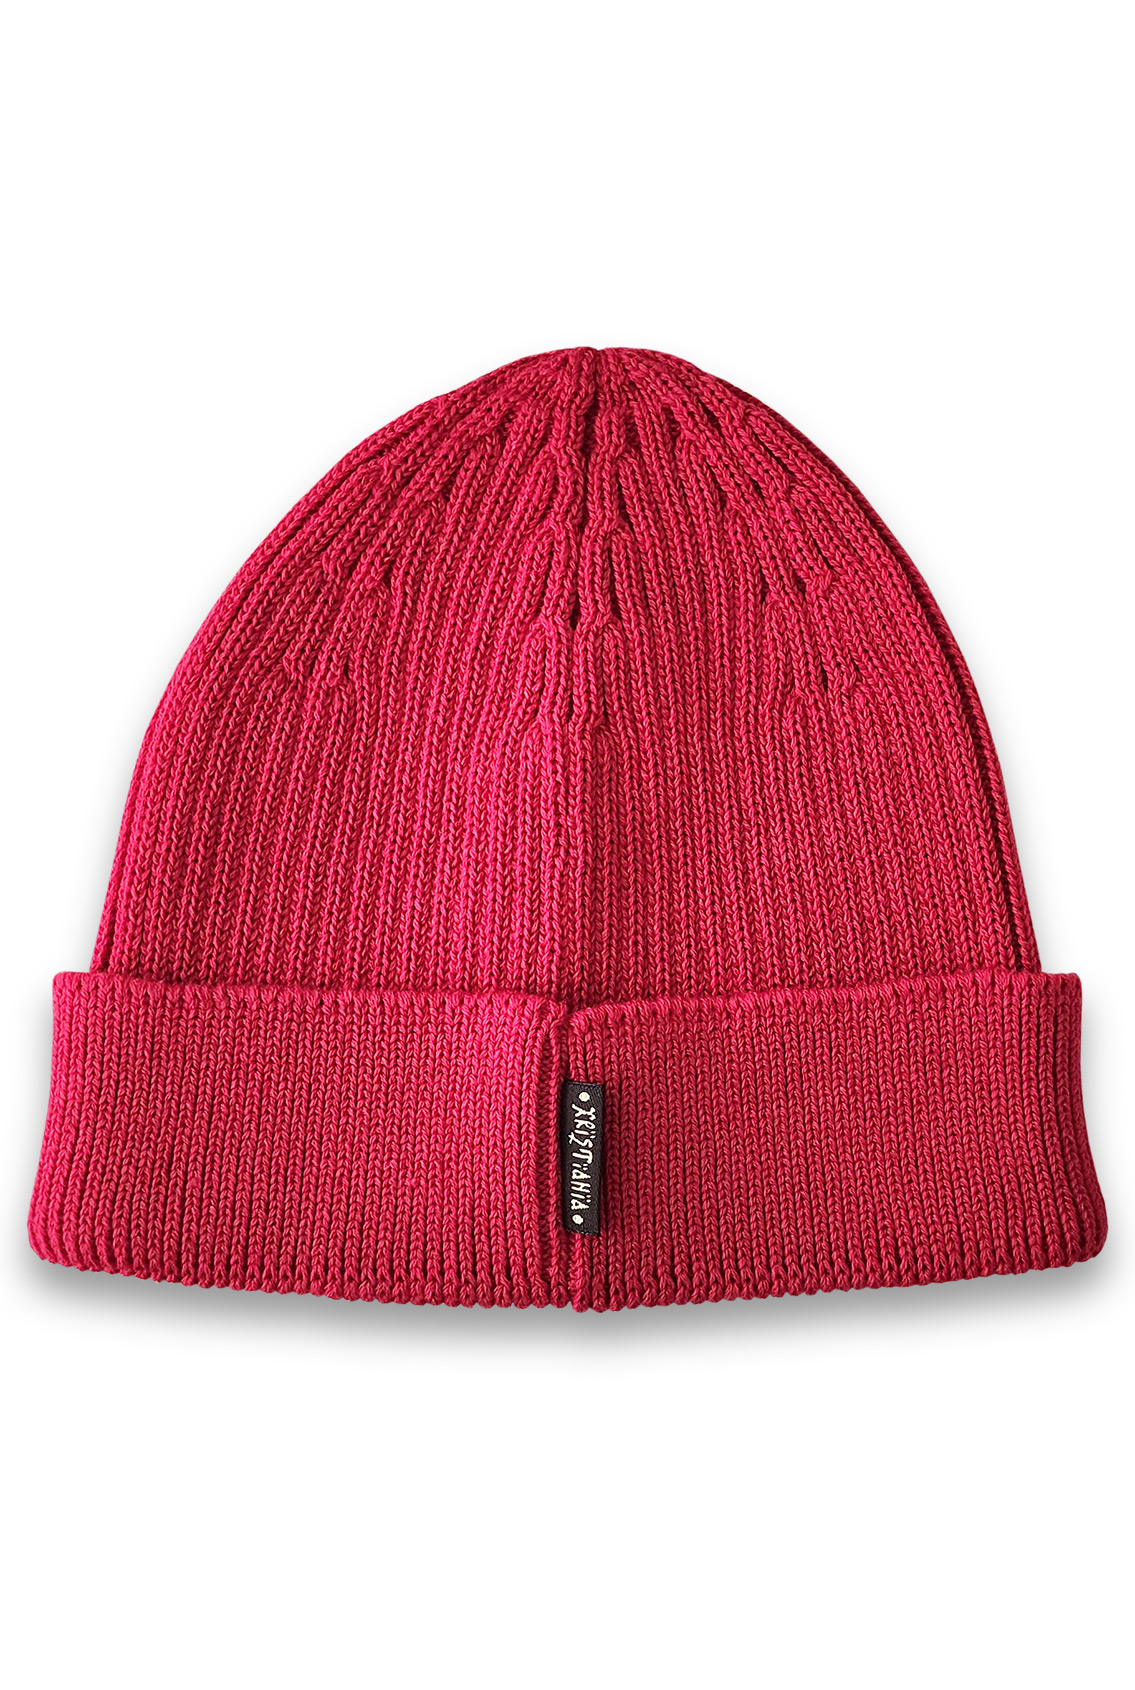 beanie hat red with embroidery